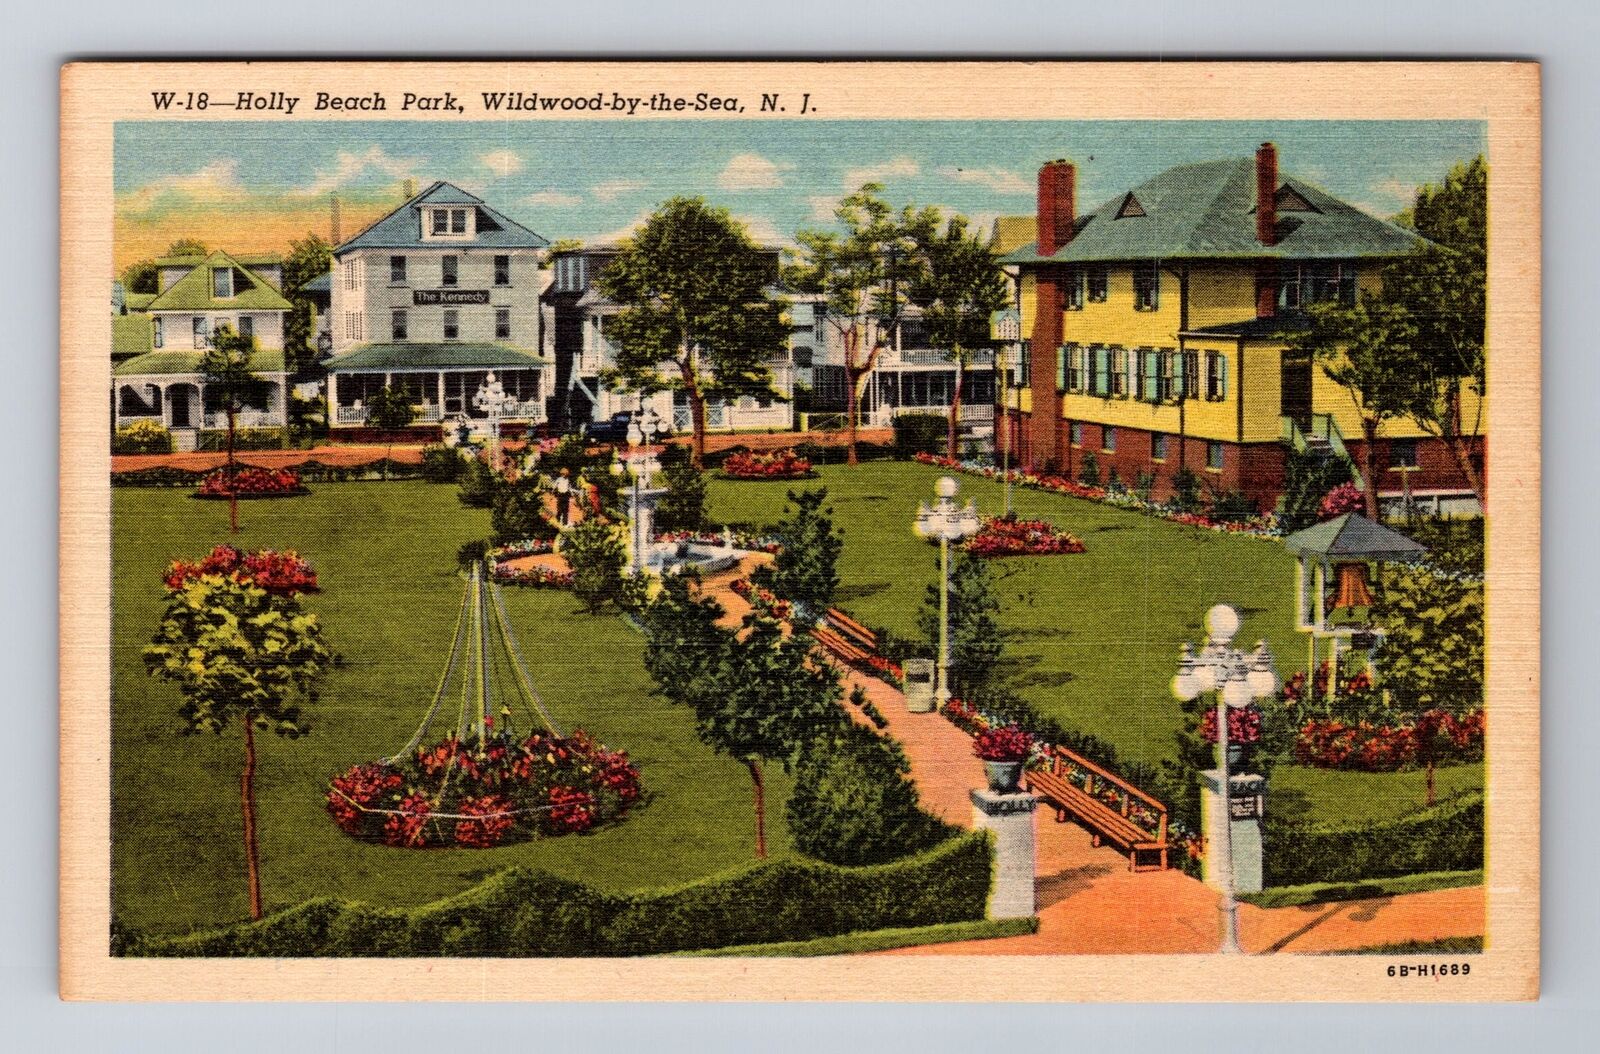 Wildwood-by-the-Sea NJ-New Jersey, Holly Beach Park, Antique Vintage Postcard